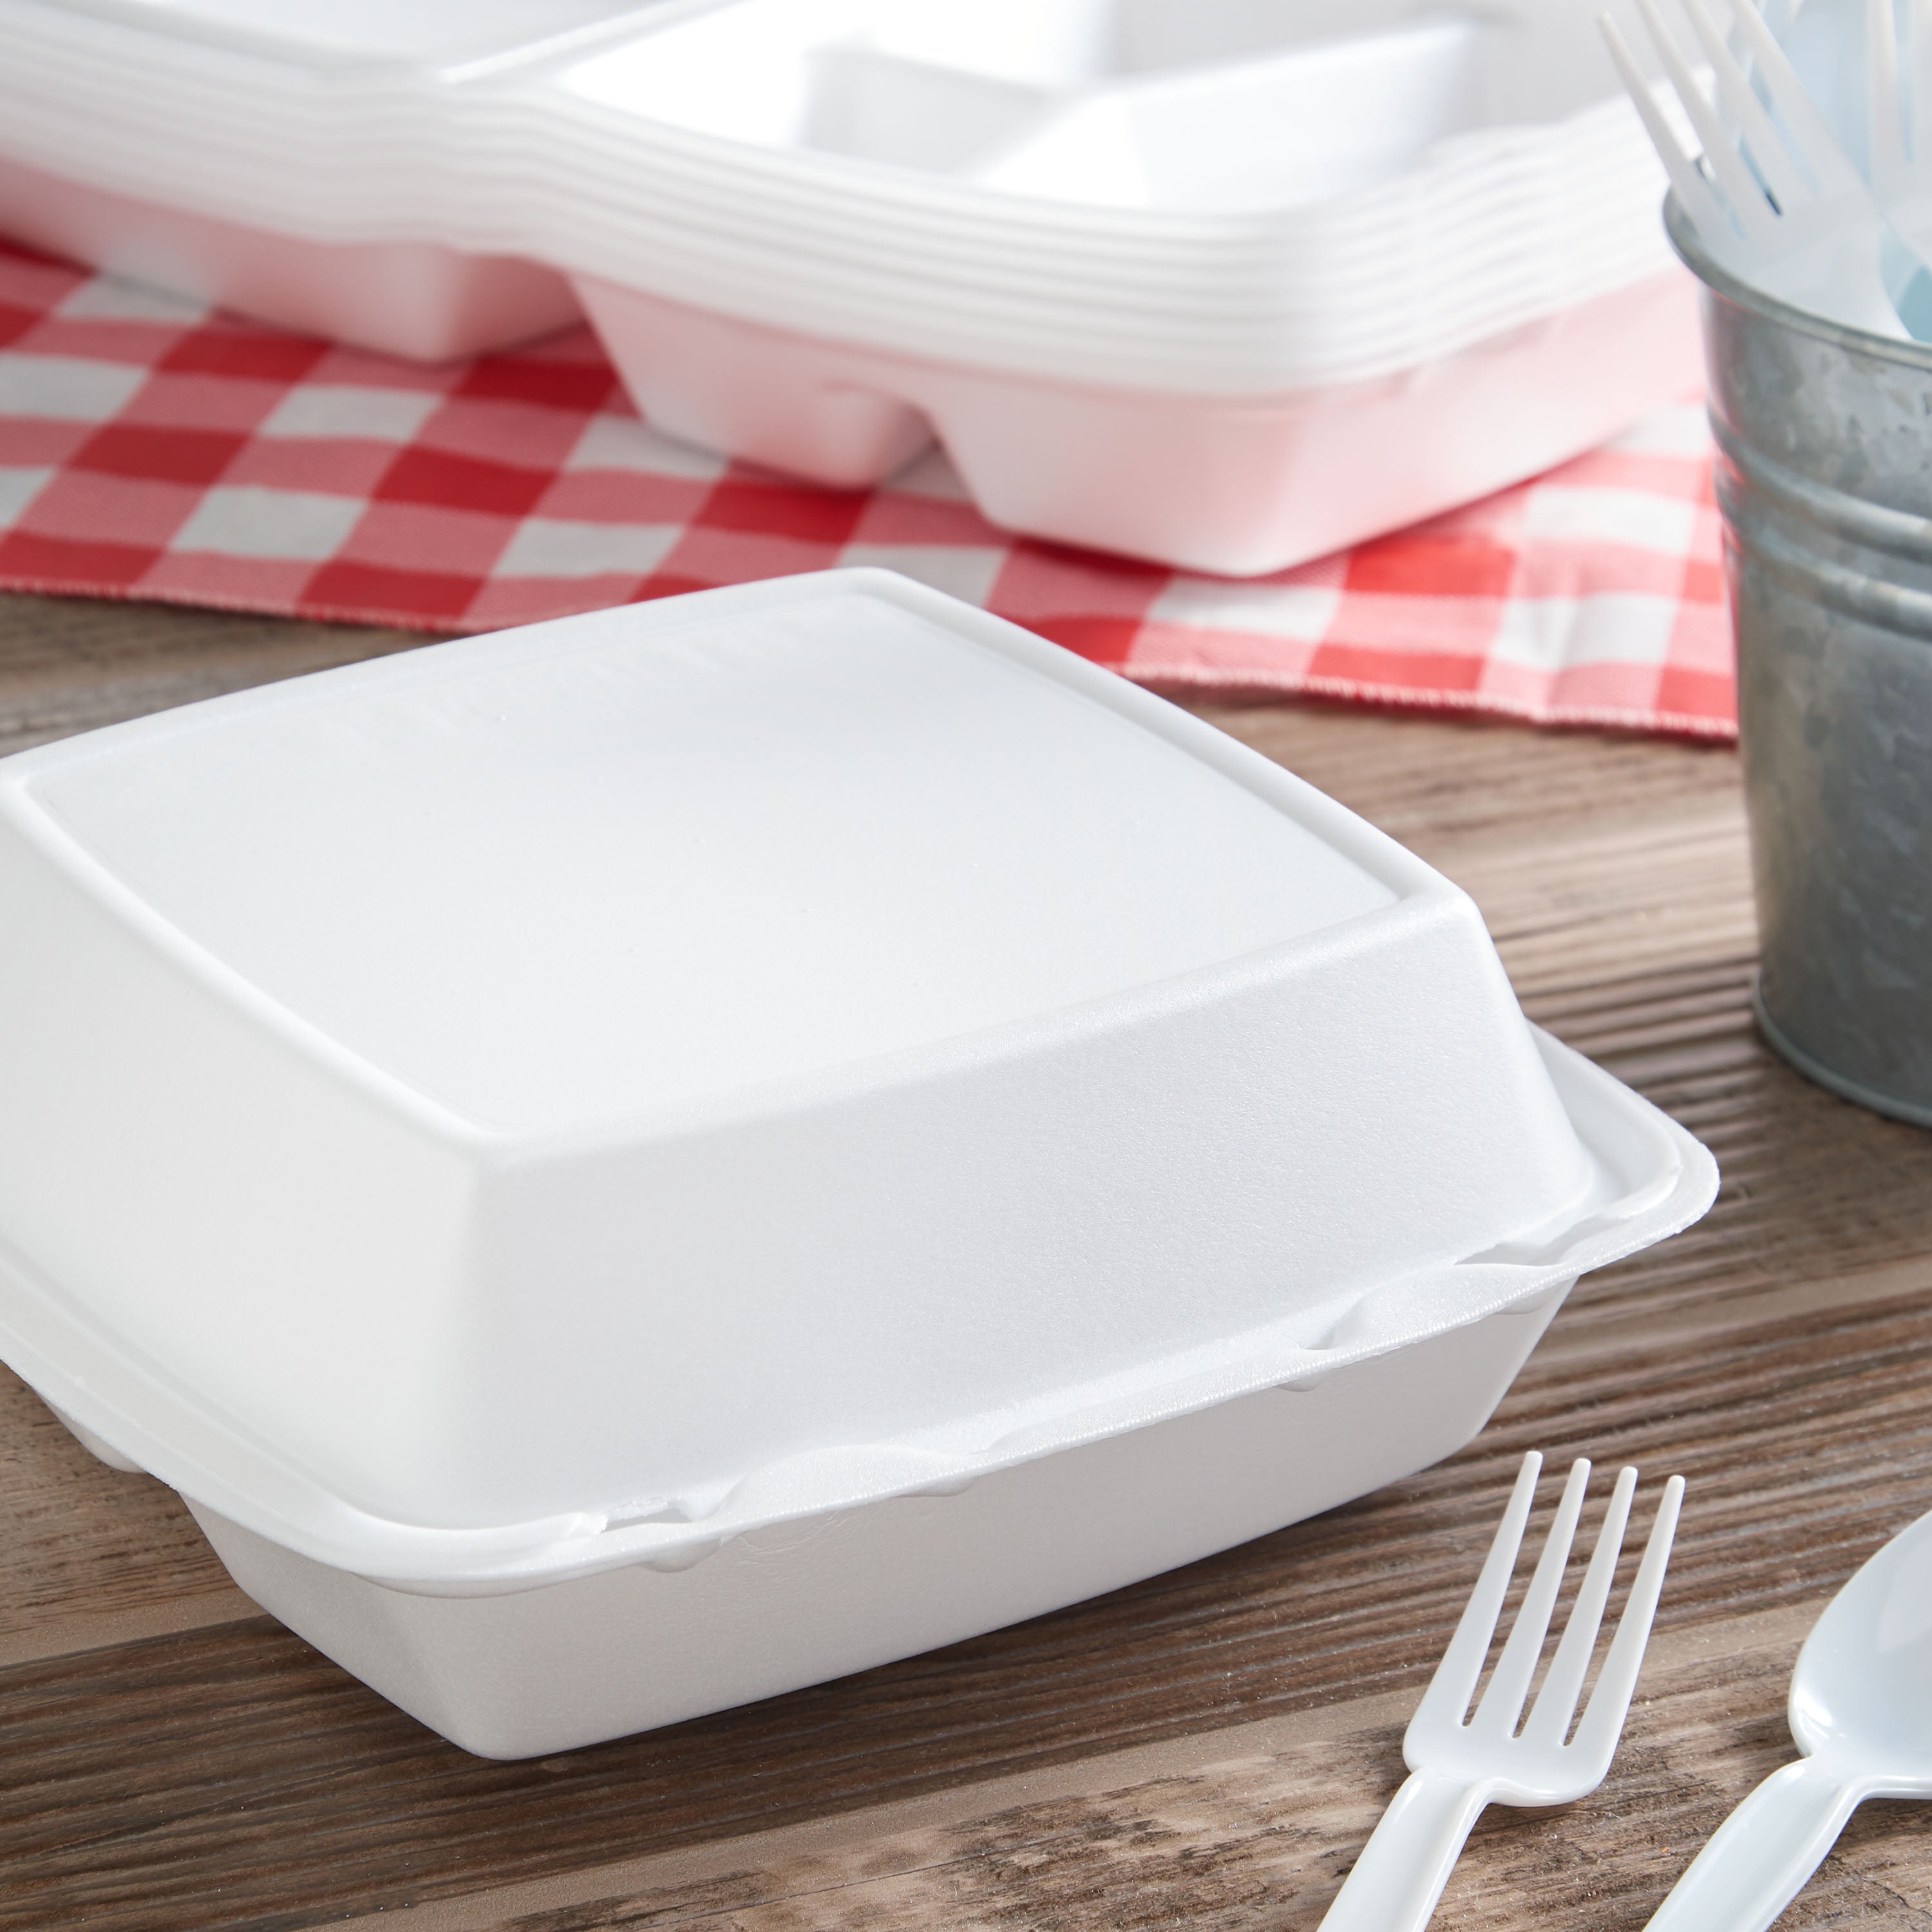 Foam Hinged, Containers, Cups, Plates & Lids — Restaurants Supply